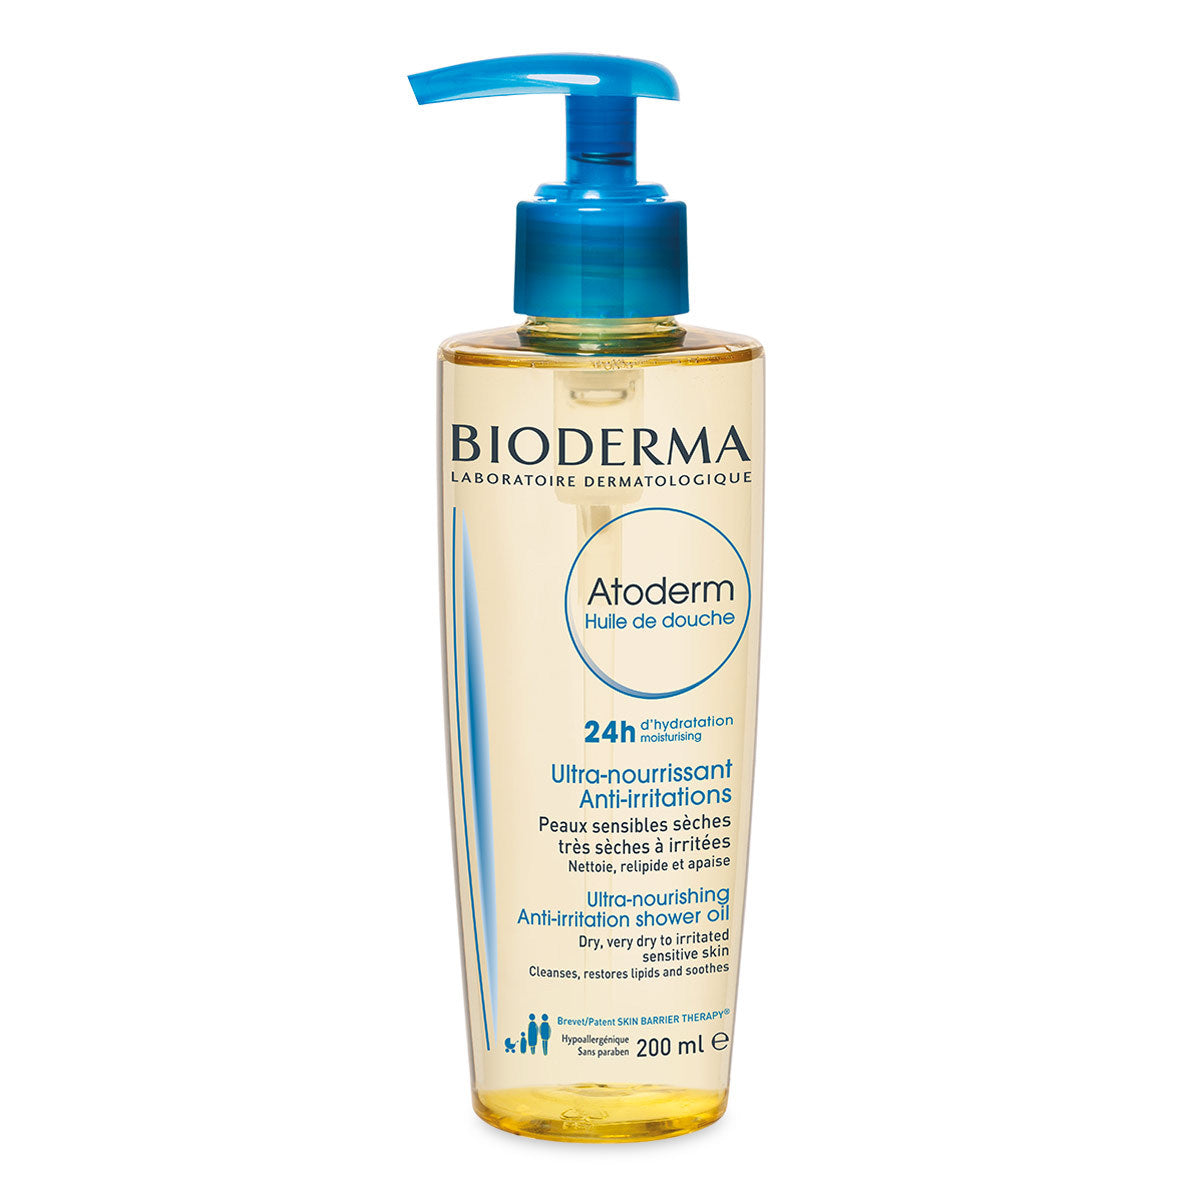 Primary image of Atoderm Shower Oil